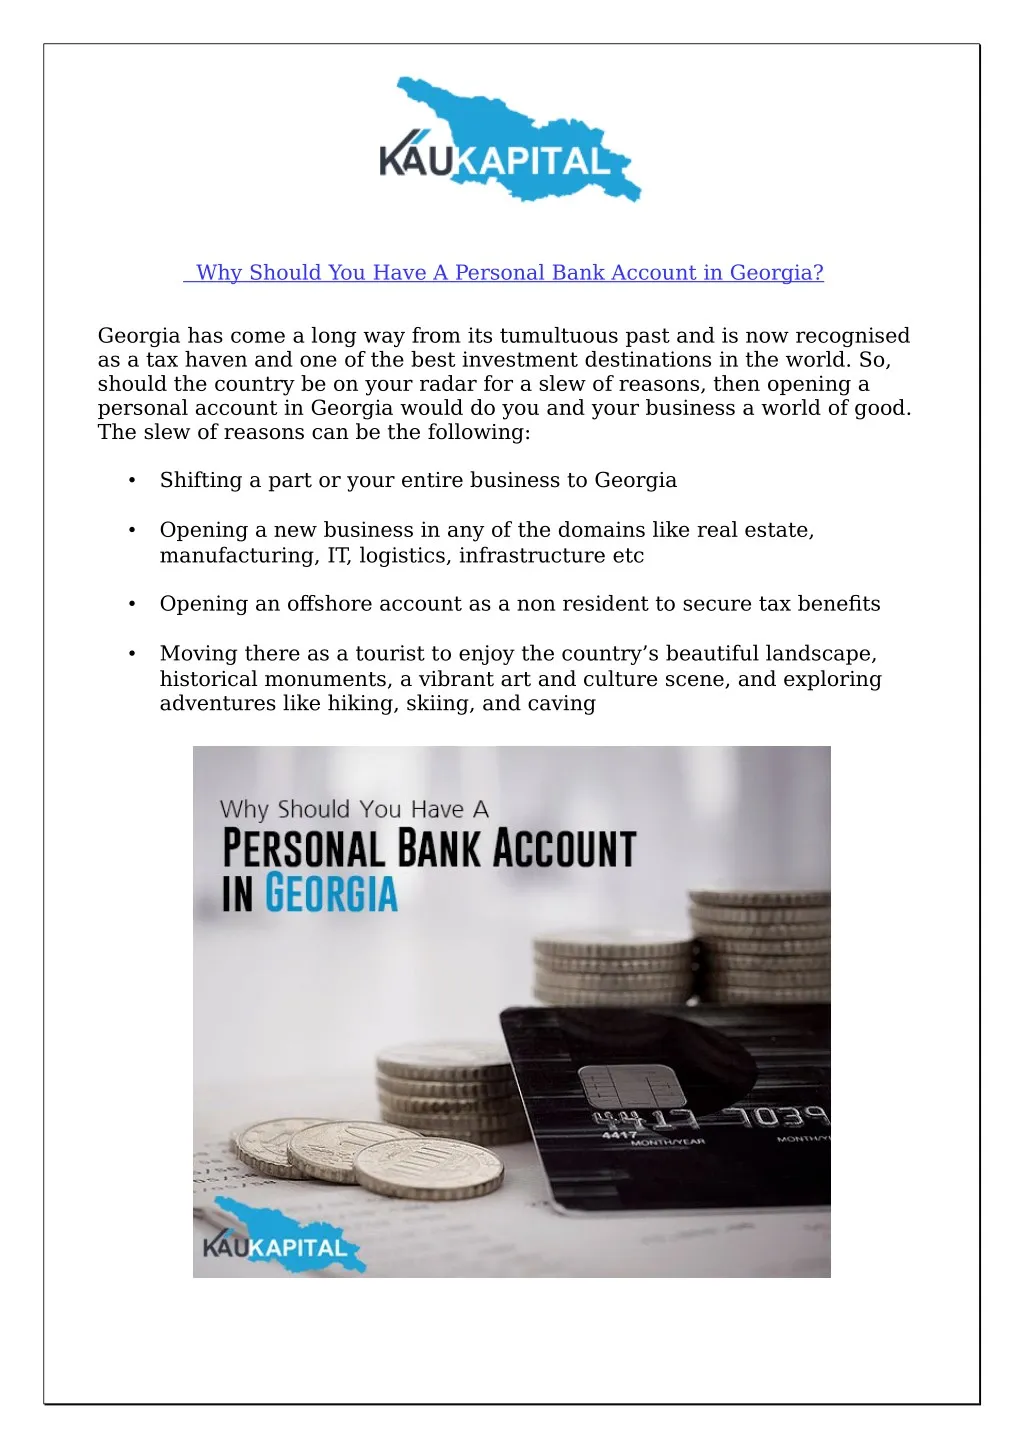 why should you have a personal bank account